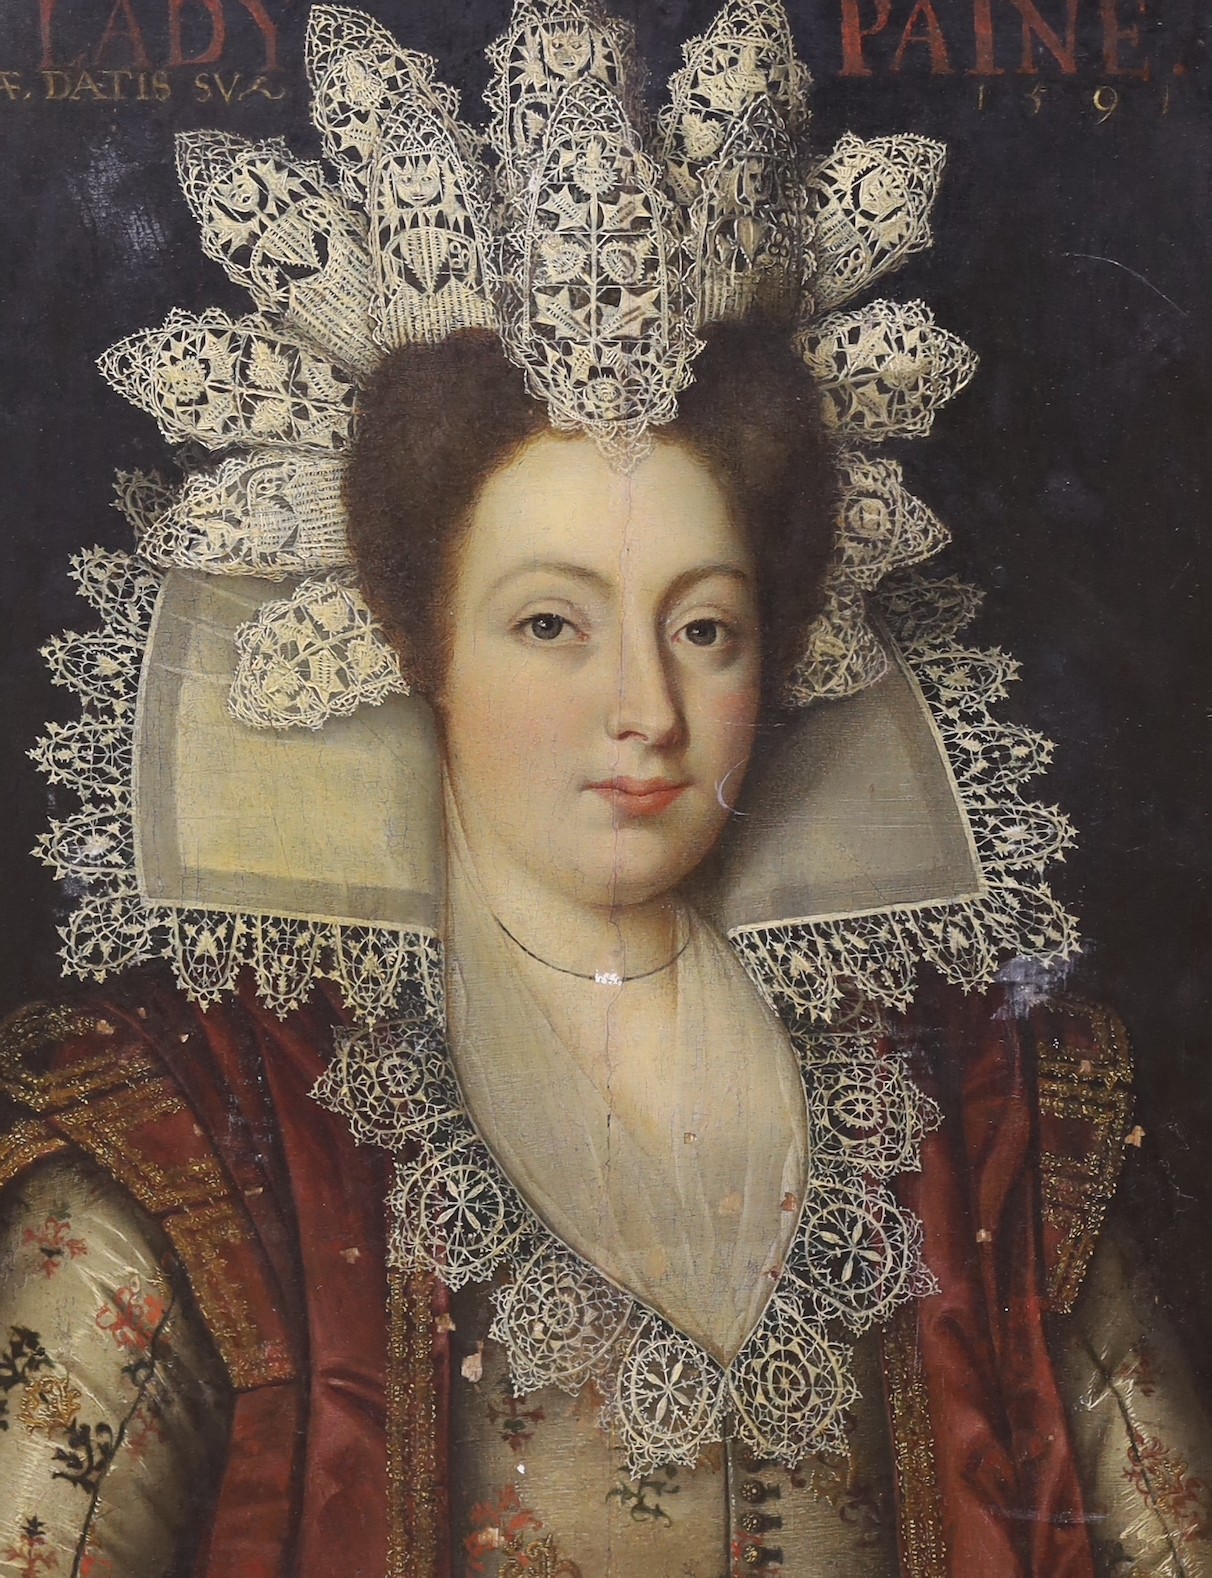 Early 19th century English School, oil on wooden panel, Portrait of 'Lady Paine, AE Datis Sua 1591',